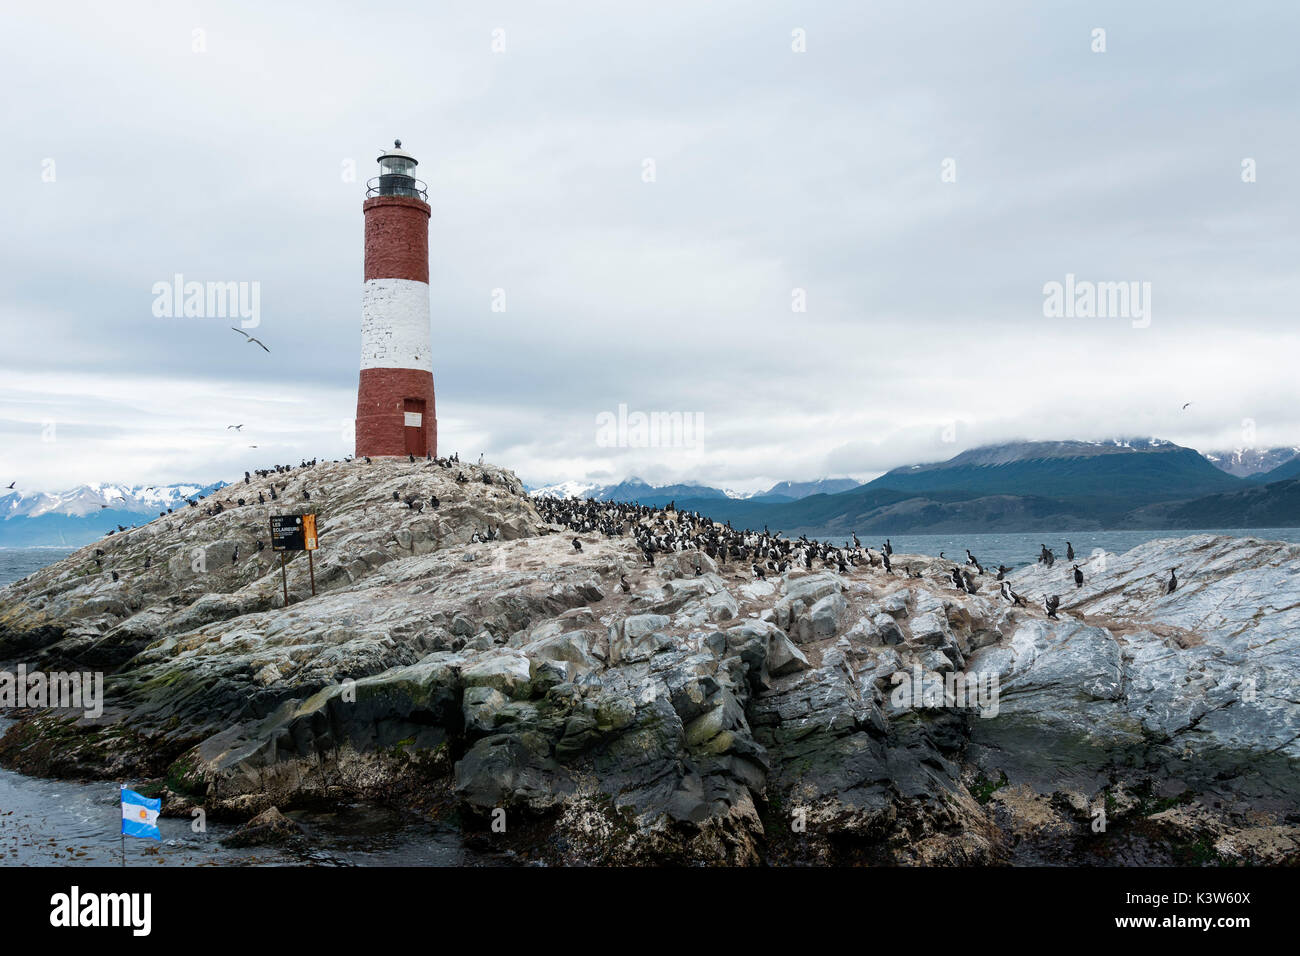 Argentina, Patagonia,Tierra del Fuego National Park, Ushuaia,Canale Beagle,Les Eclaireurs Lighthouse Foto Stock